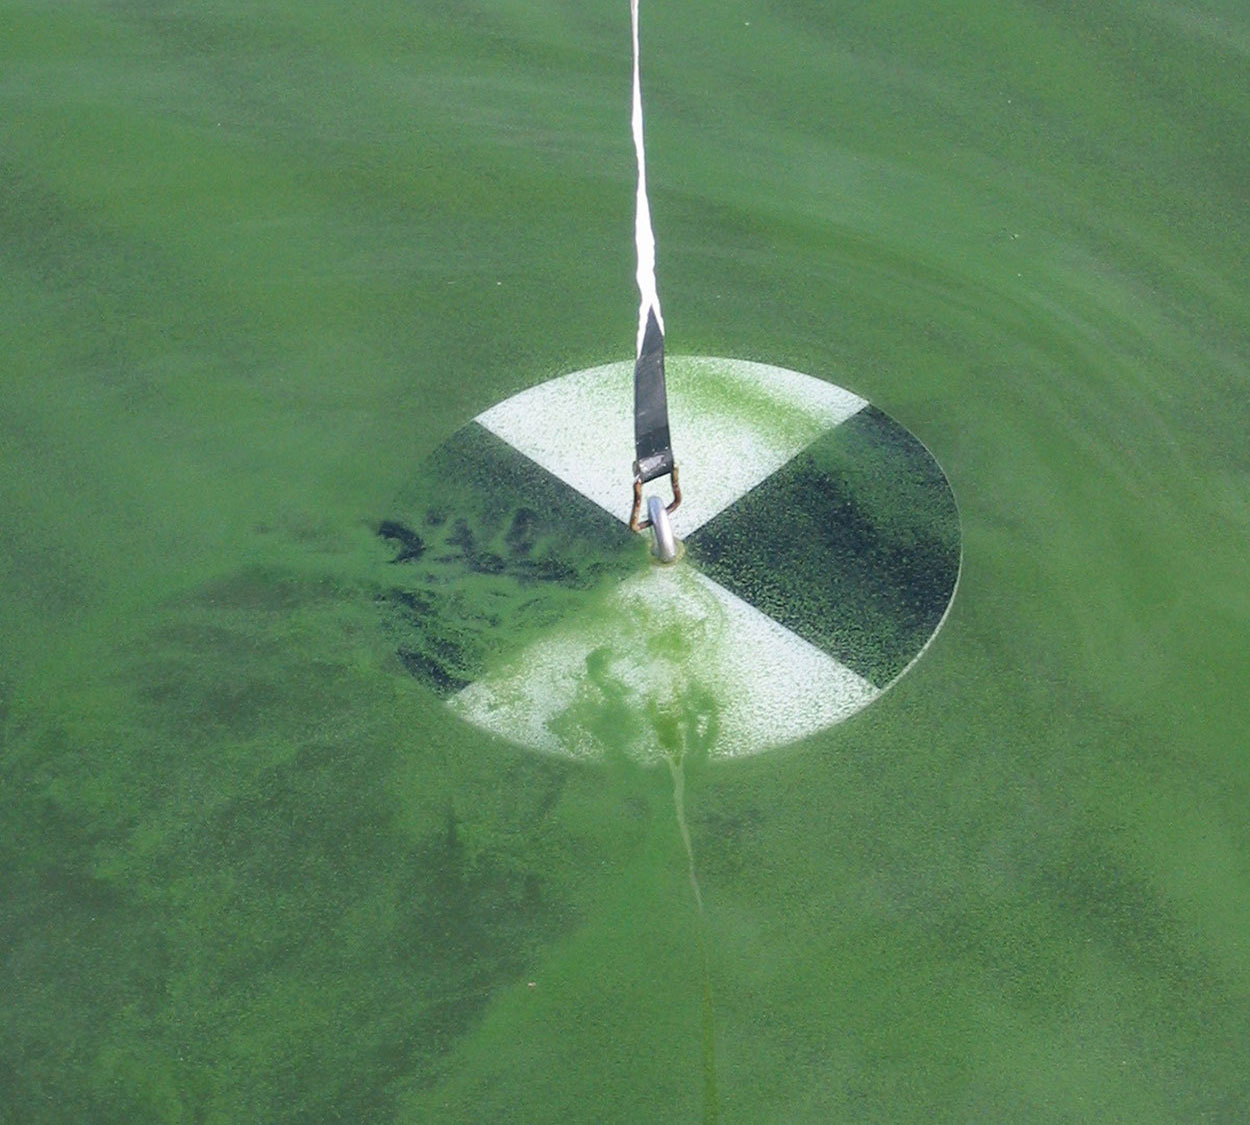 Secchi disk being used to measure lake transparency.